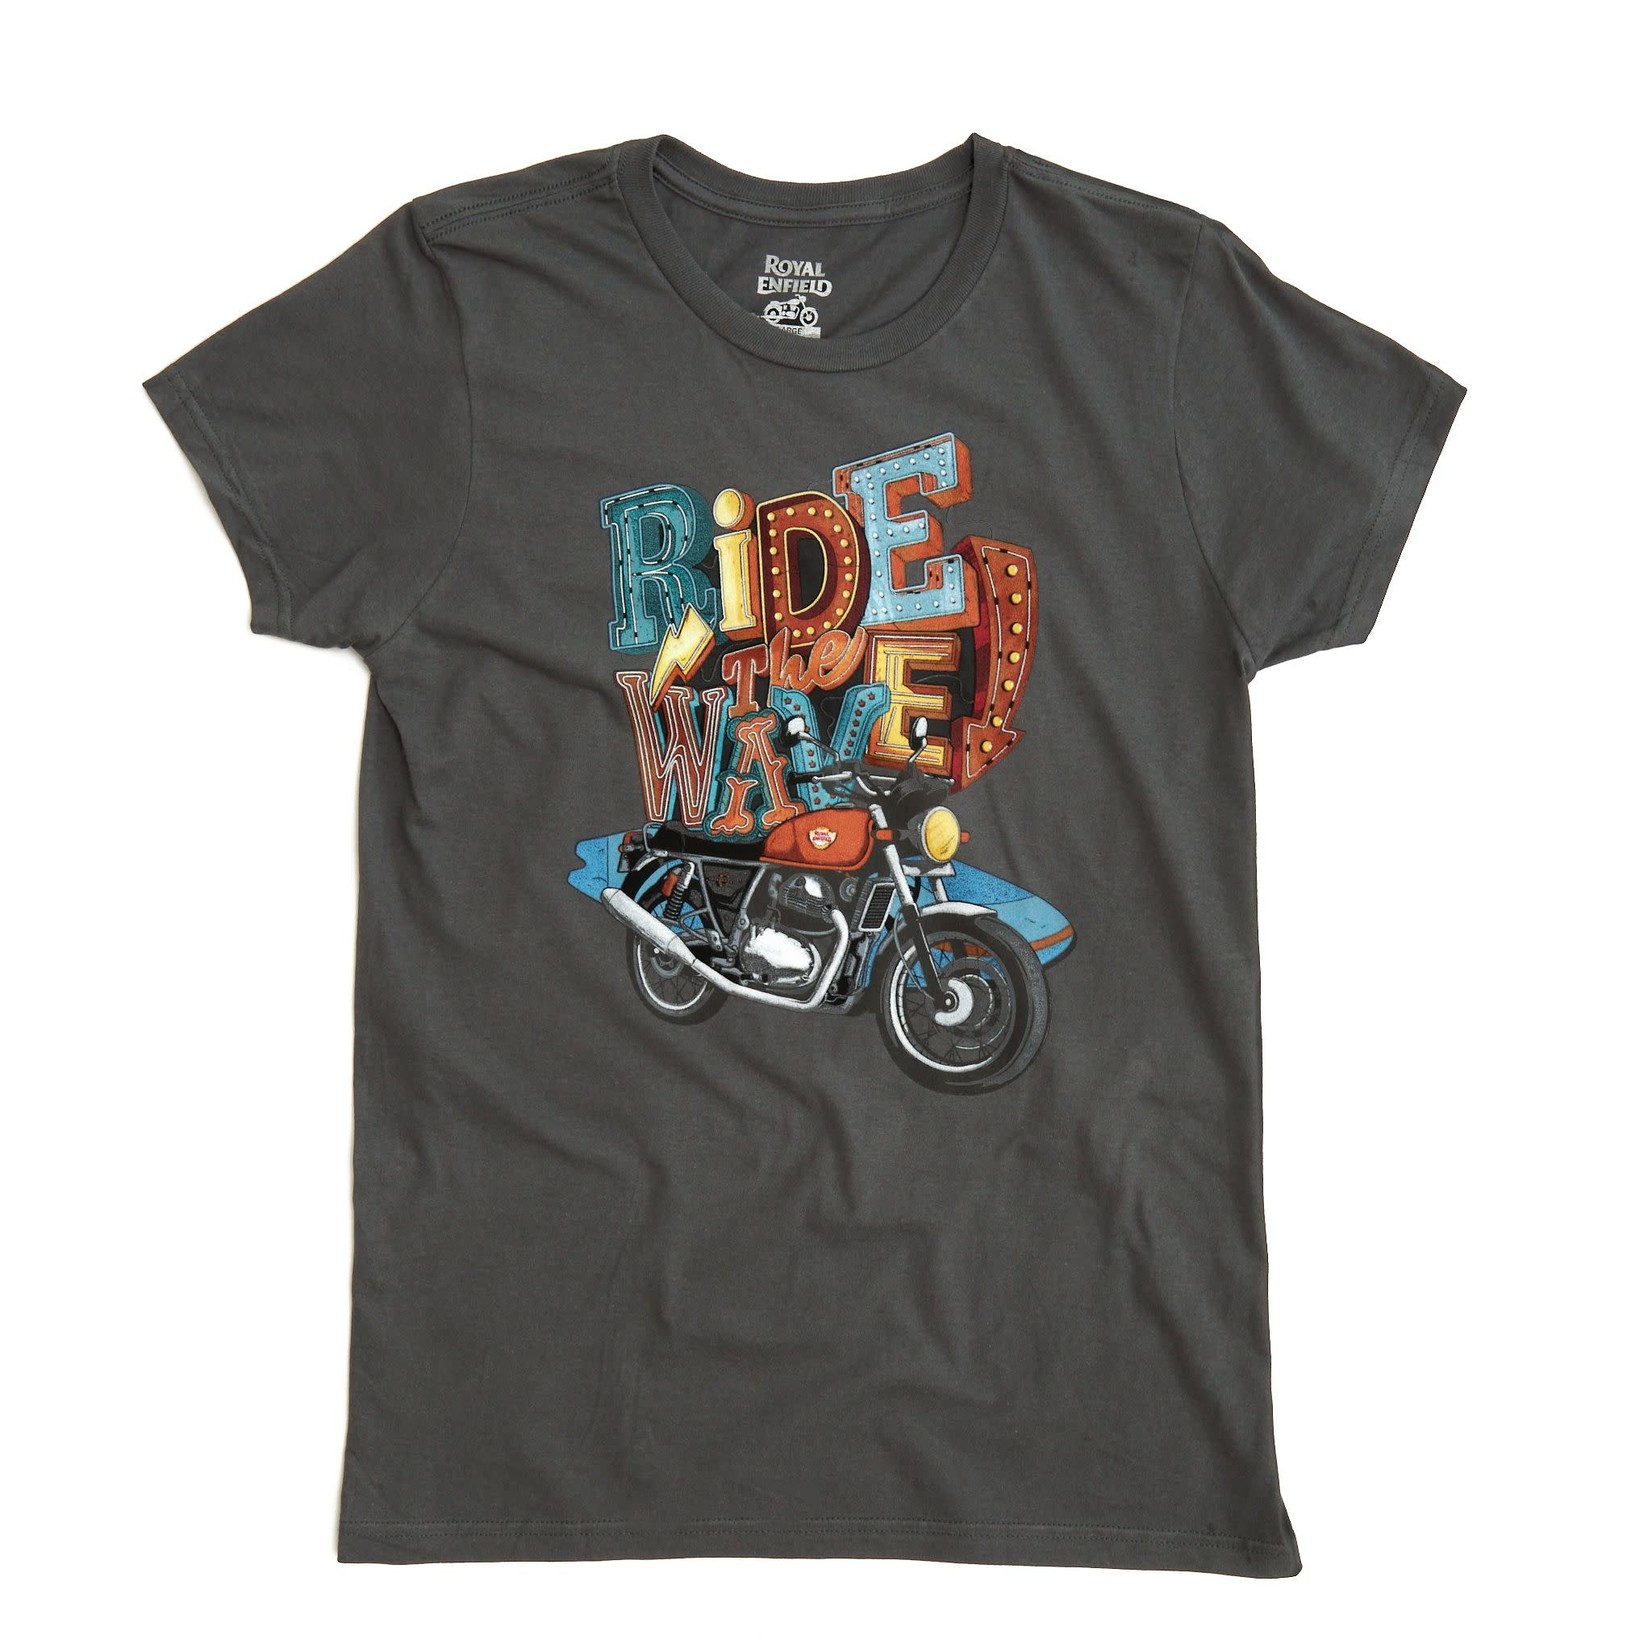 Royal Enfield Ride The Wave - RE shirt